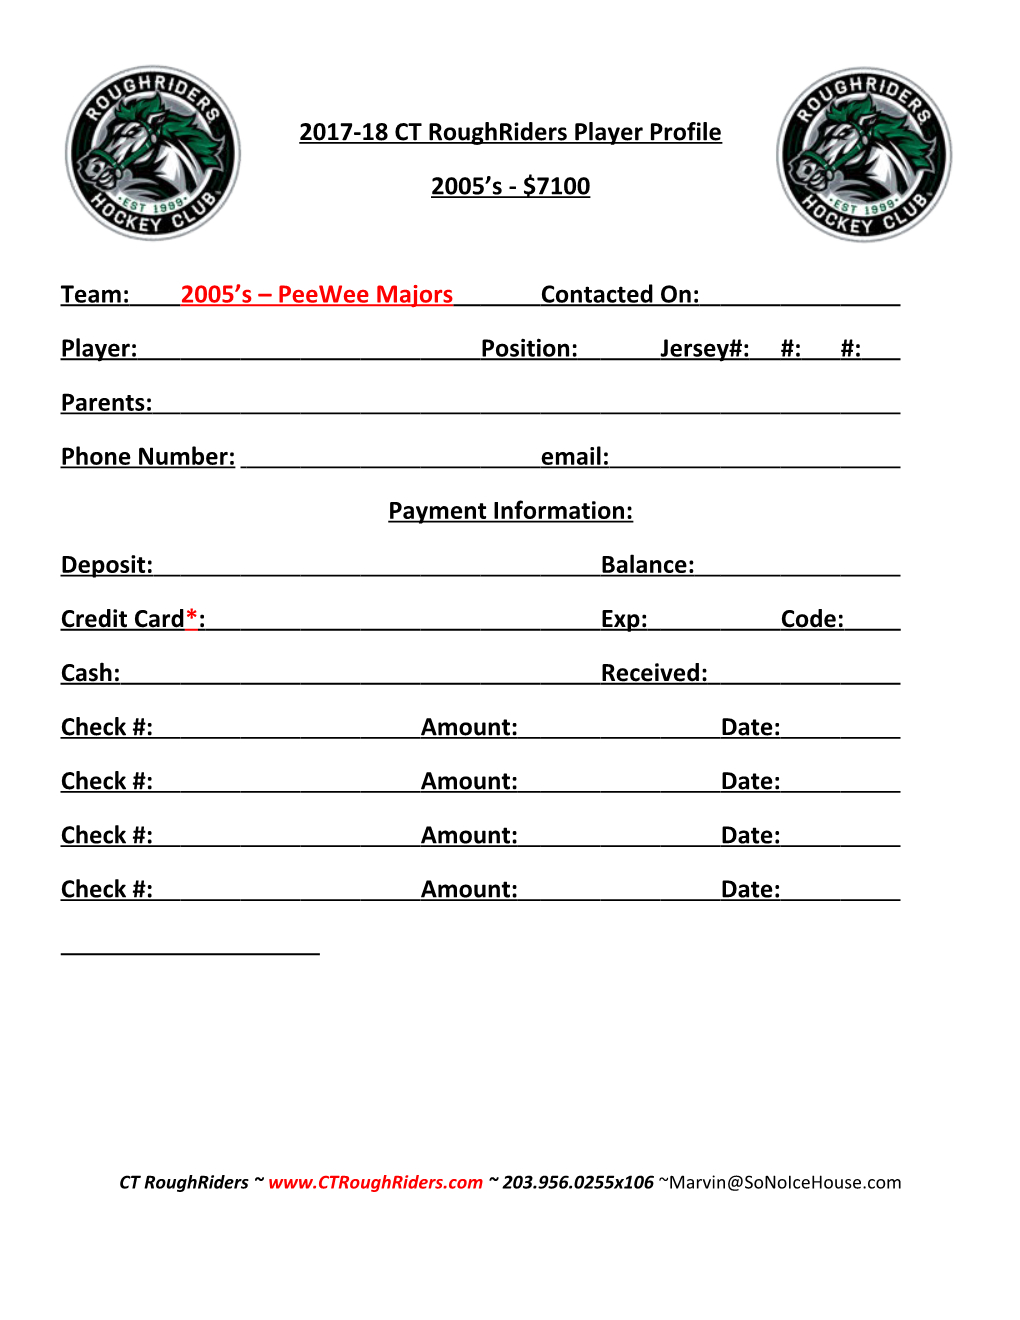 Team: 2005 S Peewee Majors Contacted On